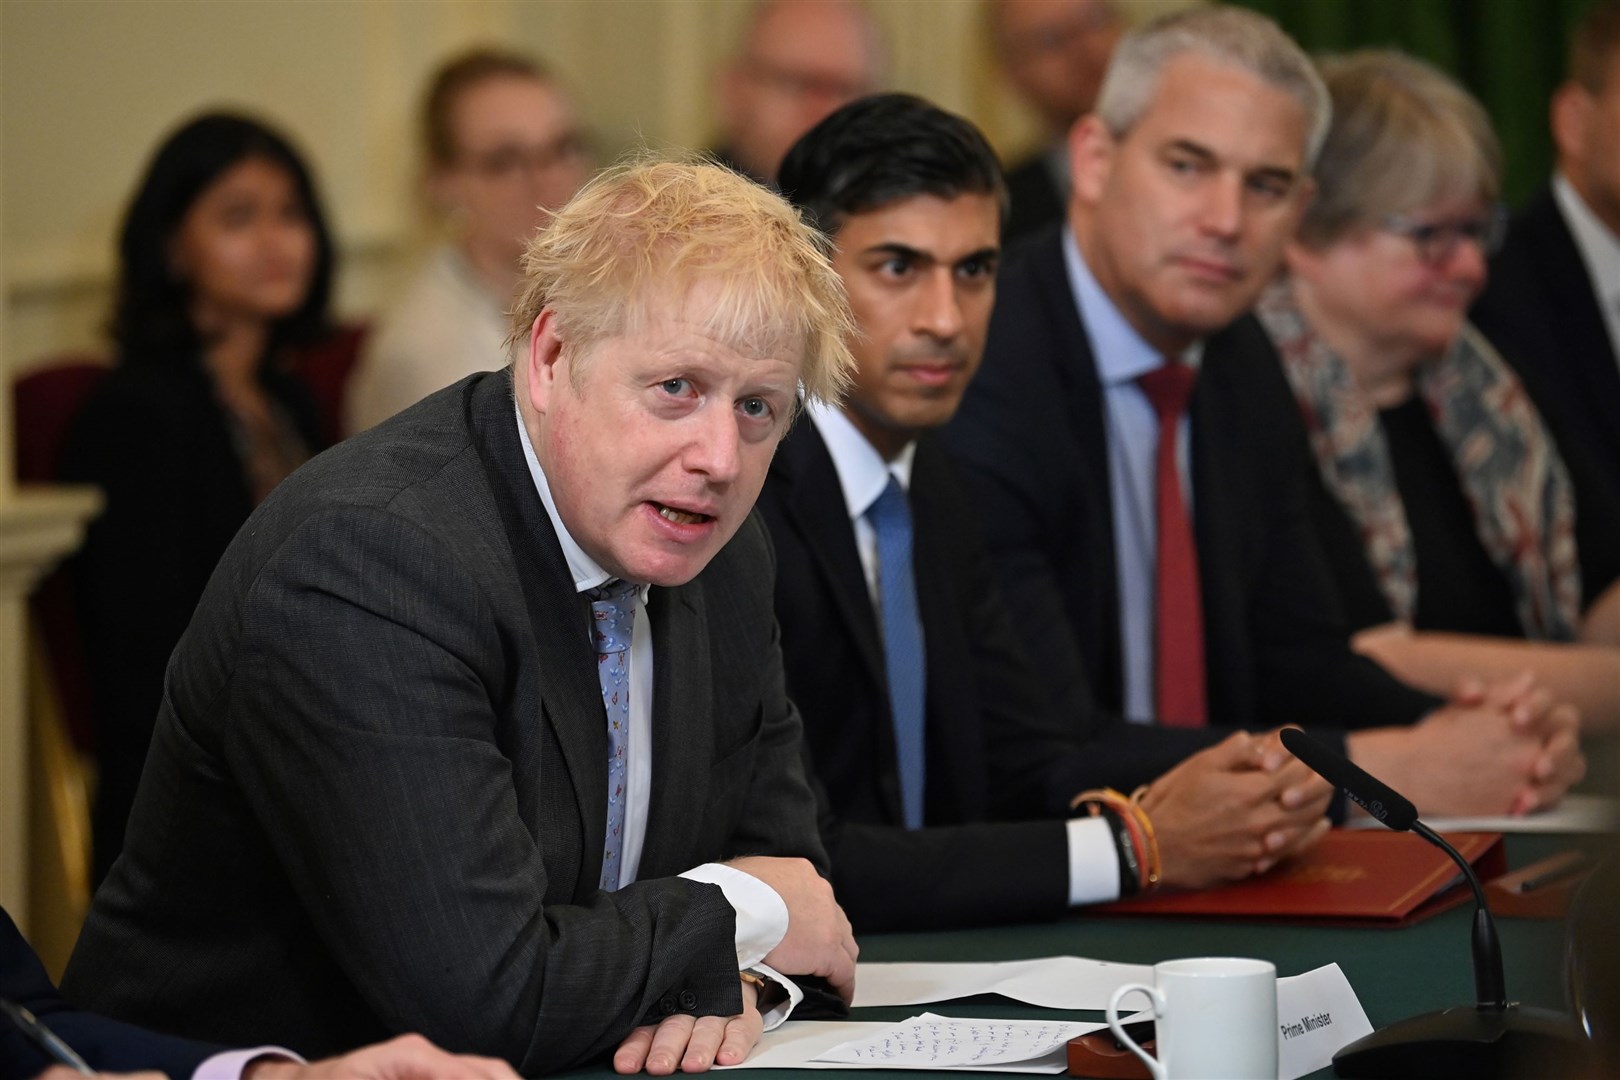 Prime Minister Boris Johnson, Chancellor of the Exchequer Rishi Sunak, and Chancellor of the Duchy of Lancaster Stephen Barclay (Ben Stansall/PA)